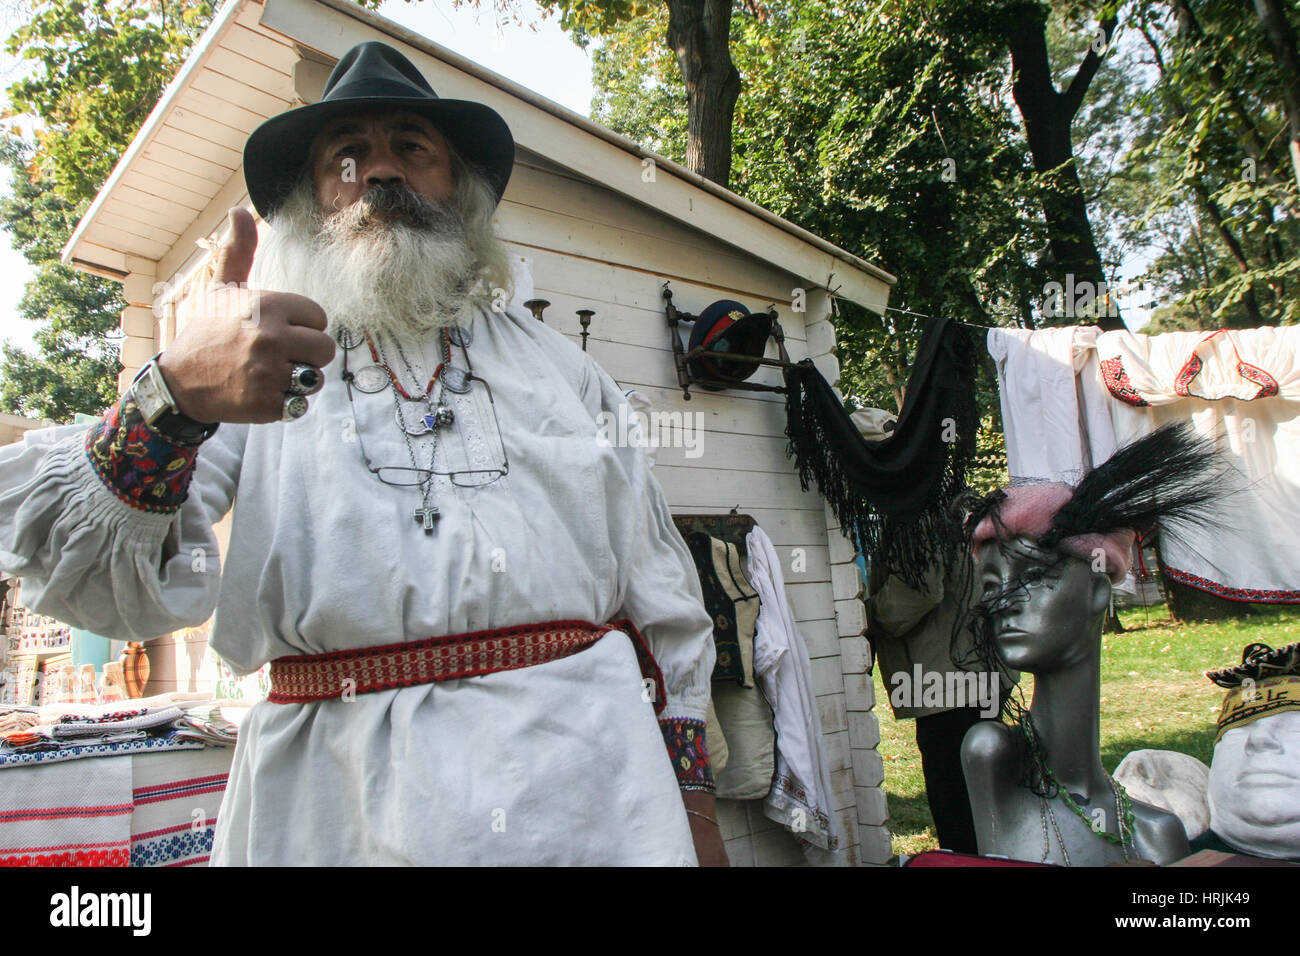 Targu Mures, Romania, September 25, 2009: An old craftsman dressed in a  traditional costume poses during the Fair of craftsmen organized in Targu  Mure Stock Photo - Alamy